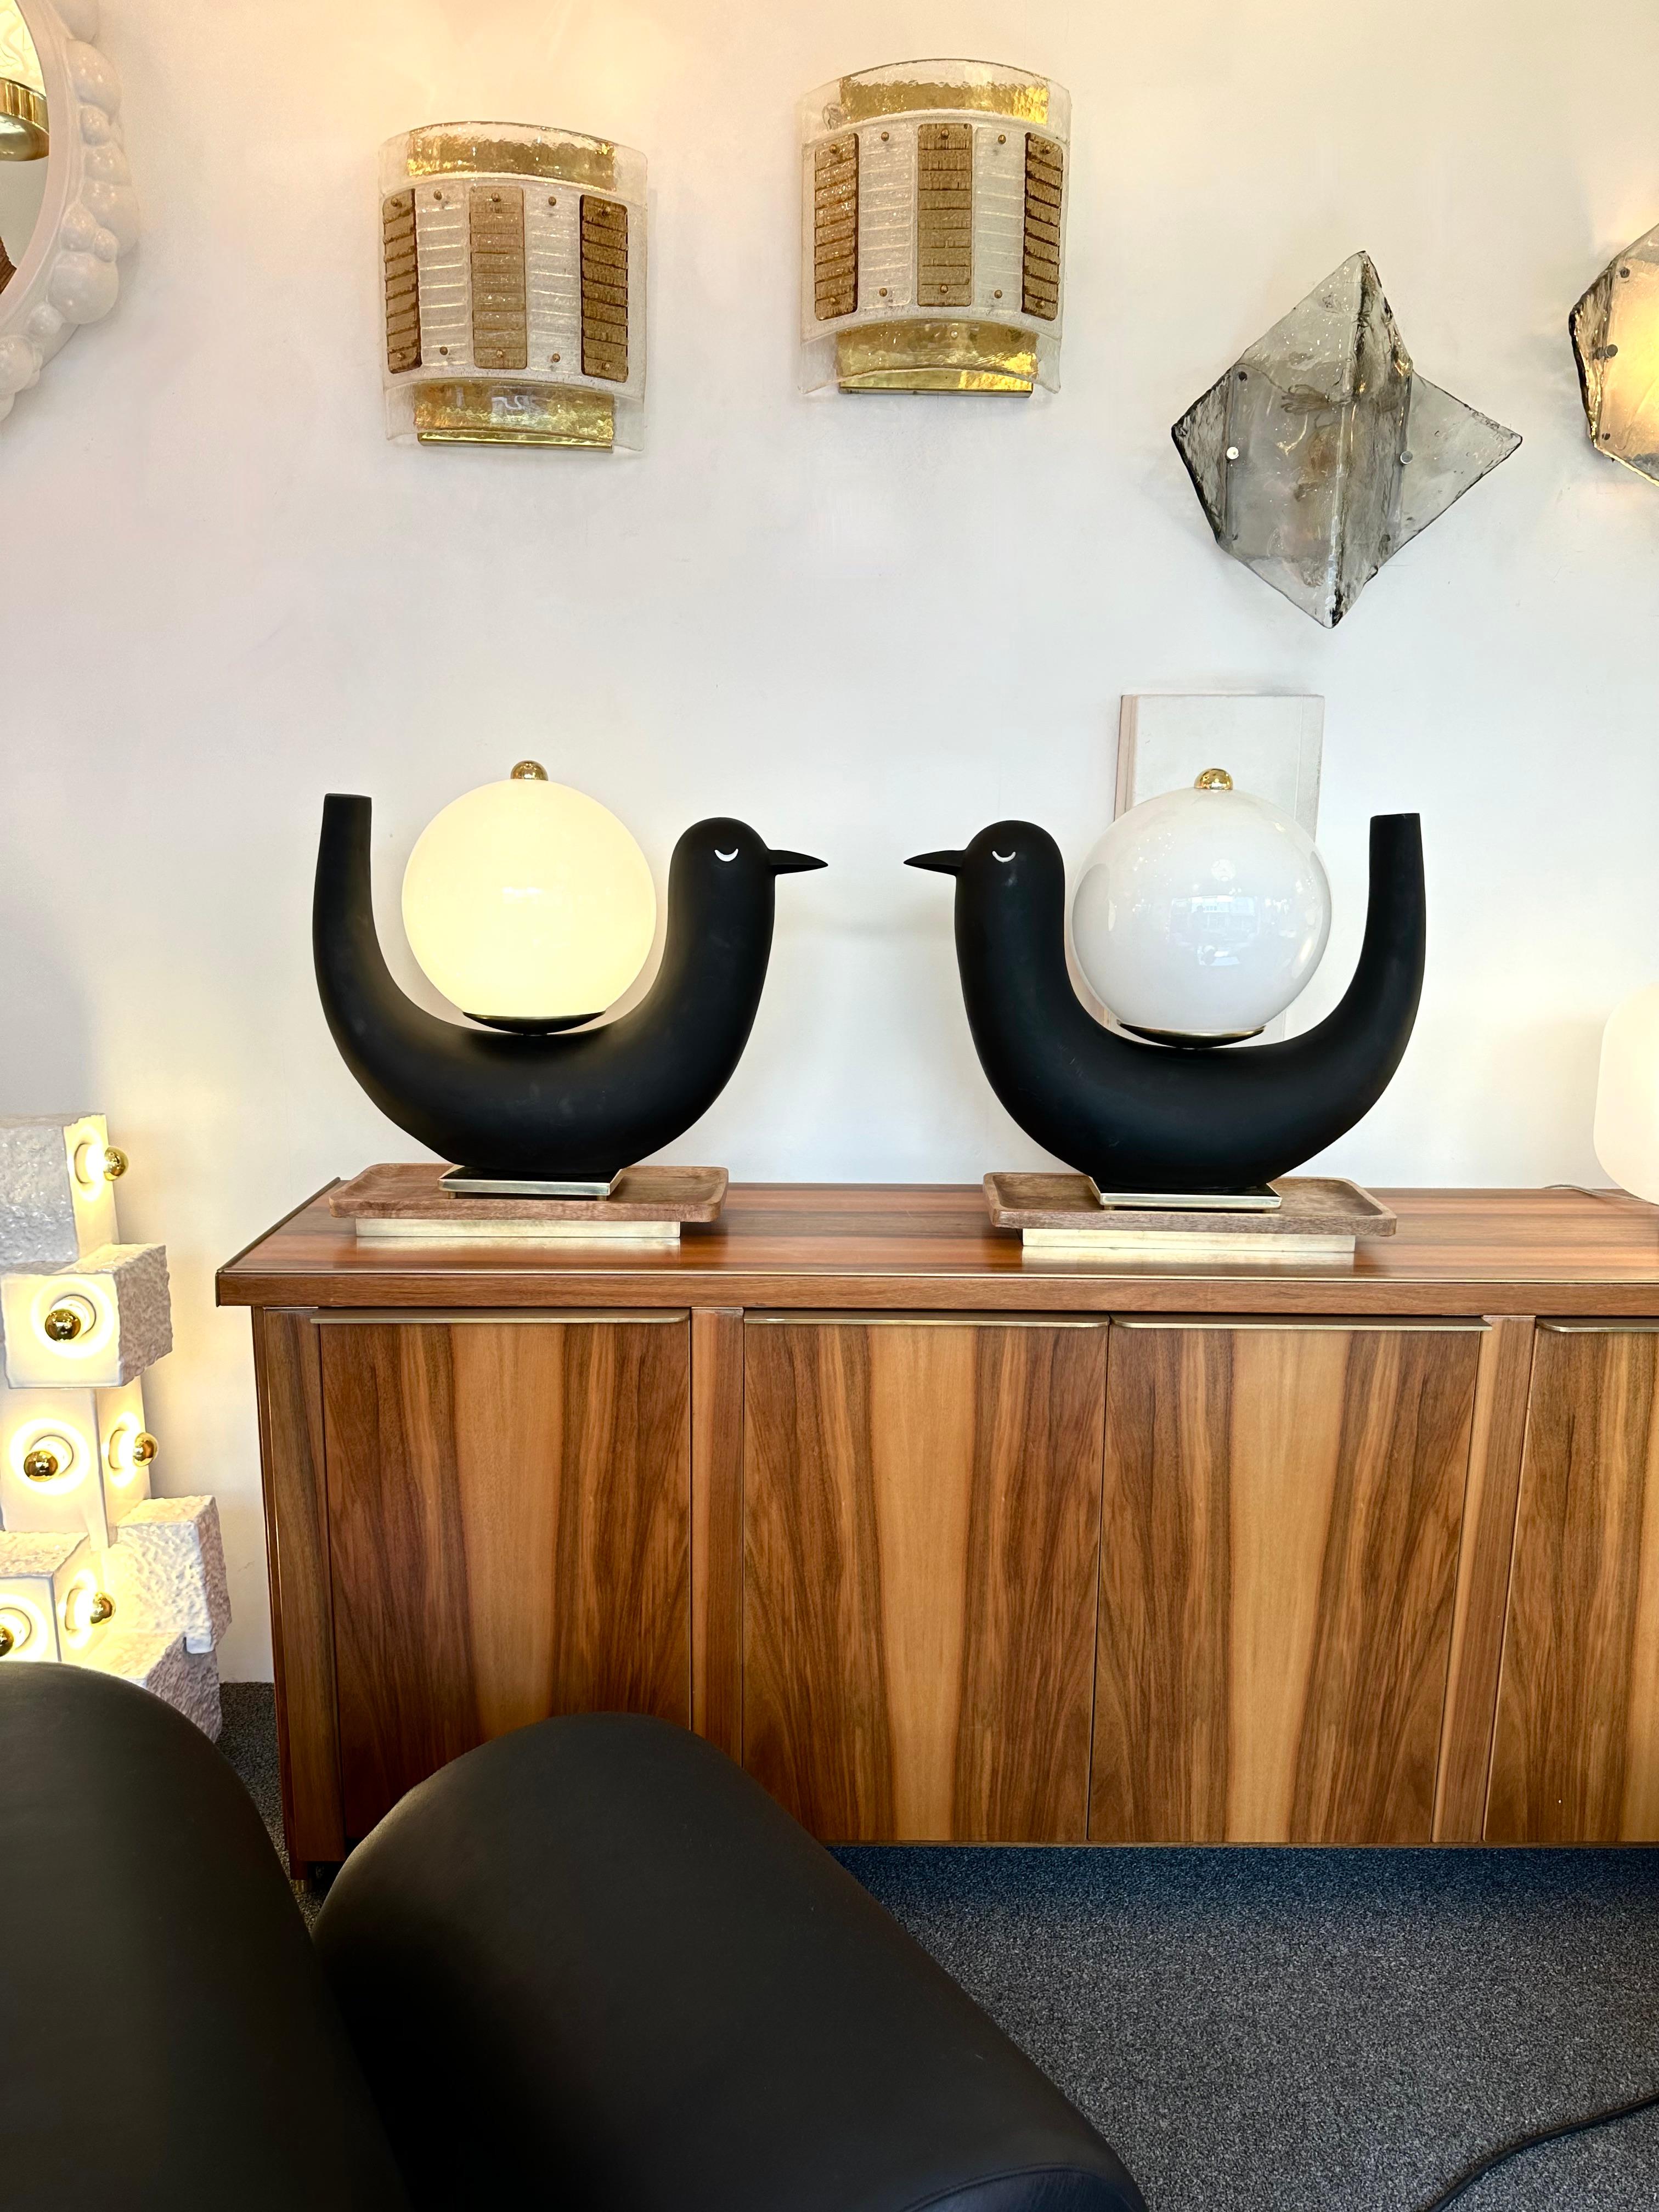 Pair of table or bedside Black bird lamps, white Opaline Murano glass, black painted resin style ceramic terracotta, brass and natural wood. Contemporary work from a small italian artisanal design workshop in a Mid-Century Modern, Brutalist style.